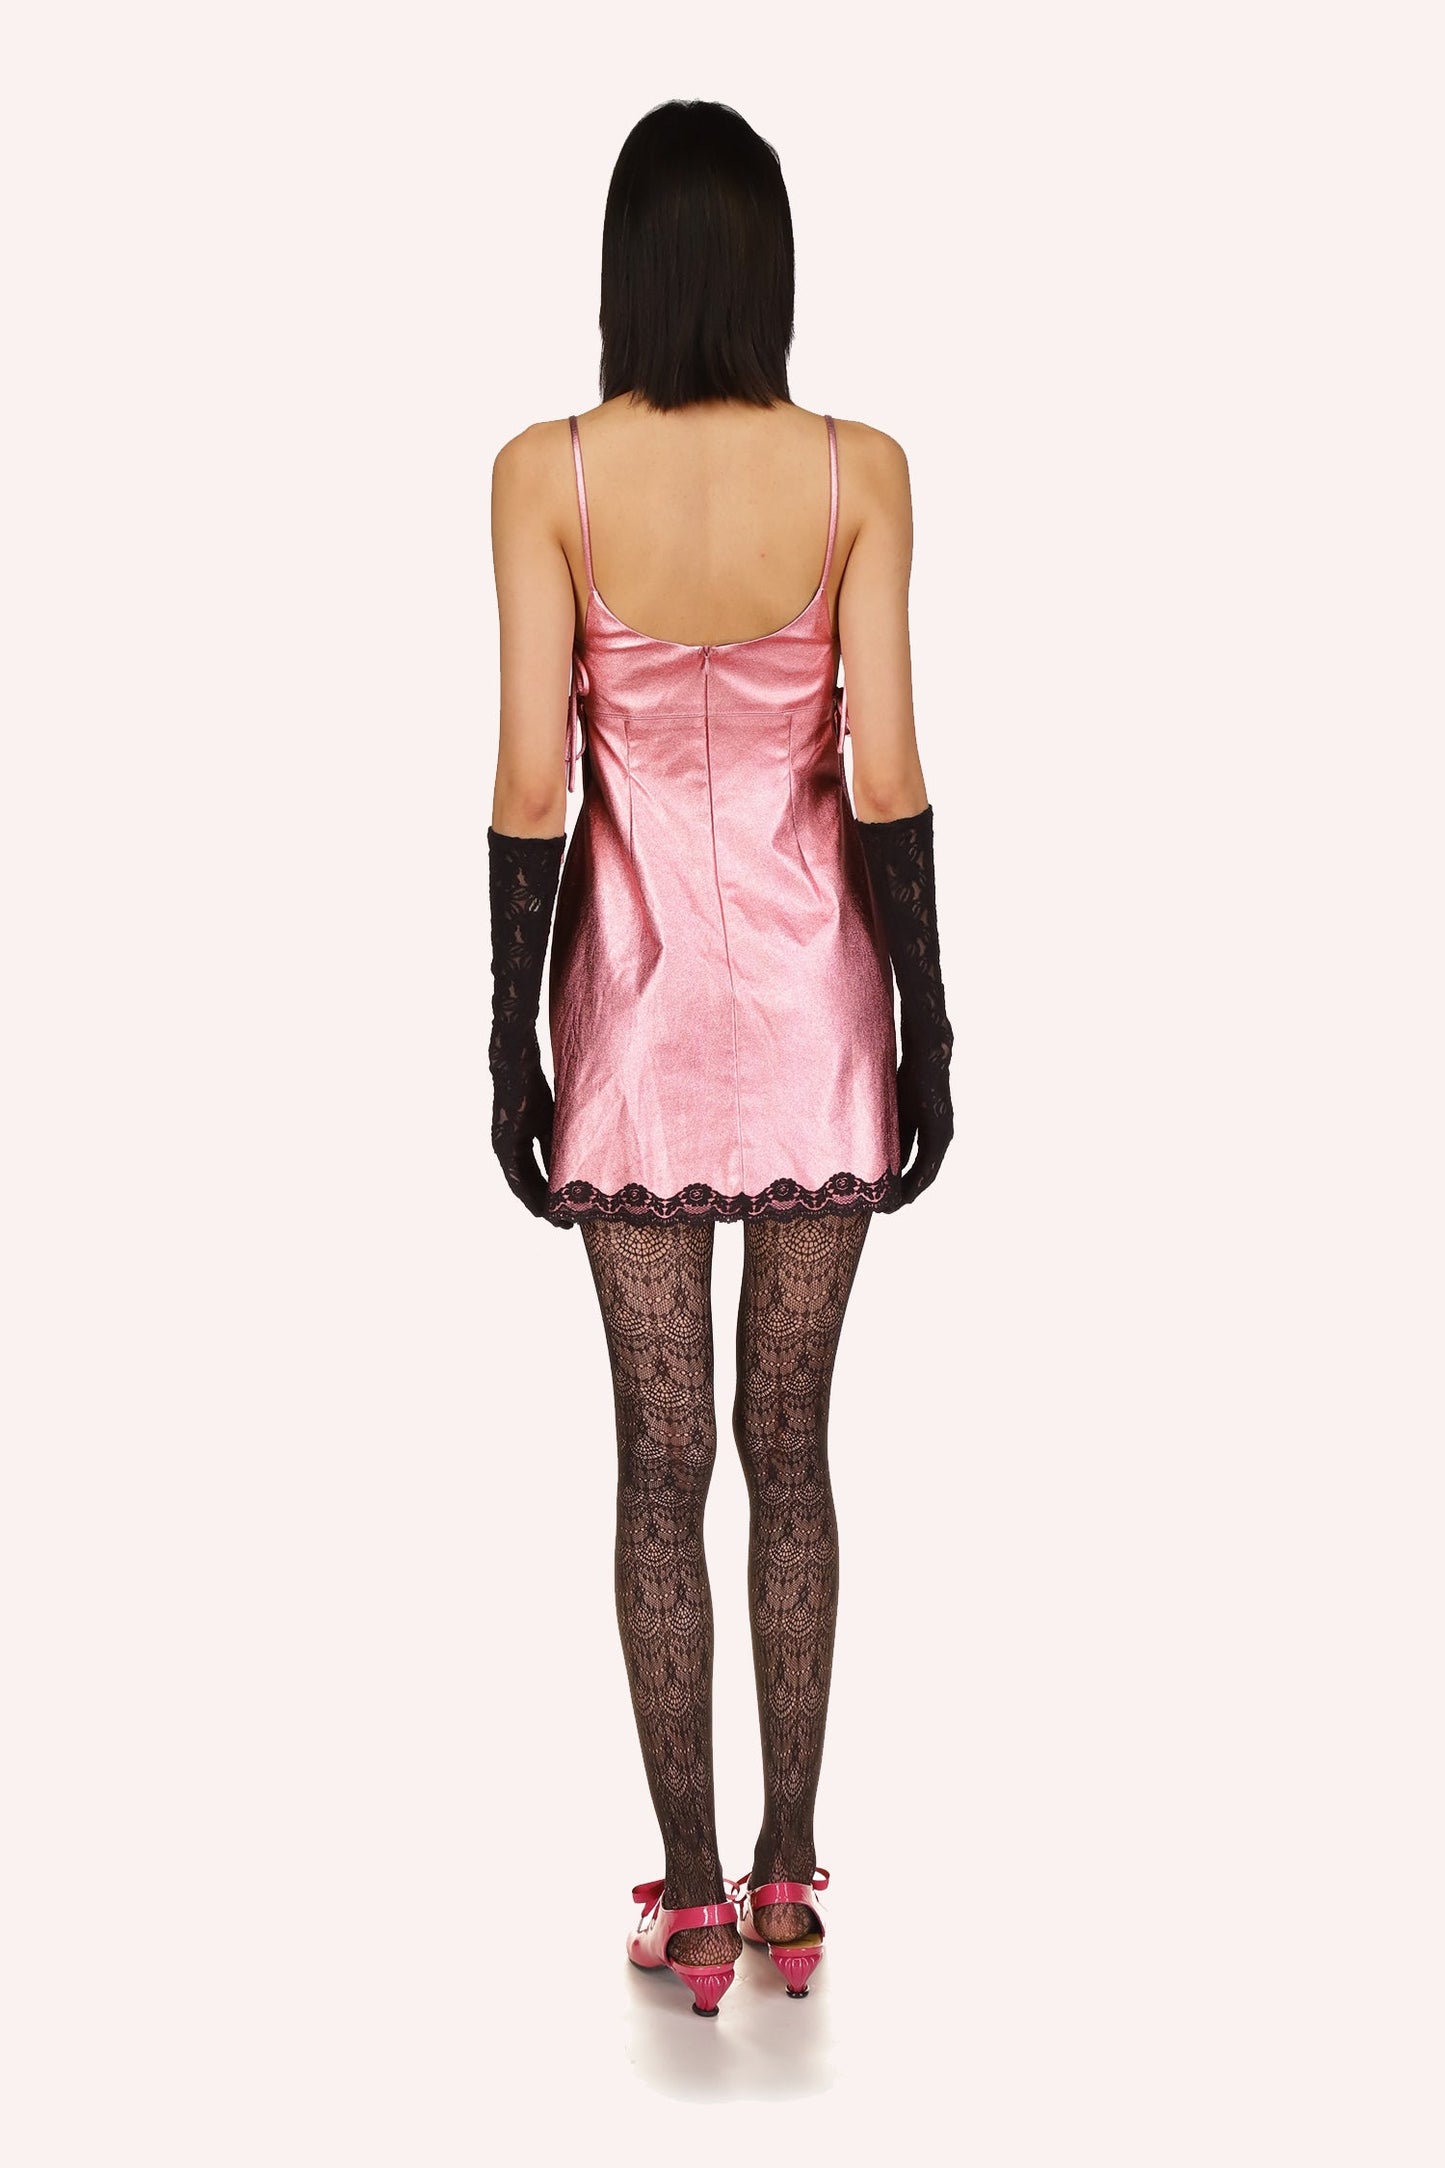 Bubblegum, sleeveless, 2-straps, wavy black lace at the bottom, zipper in the back